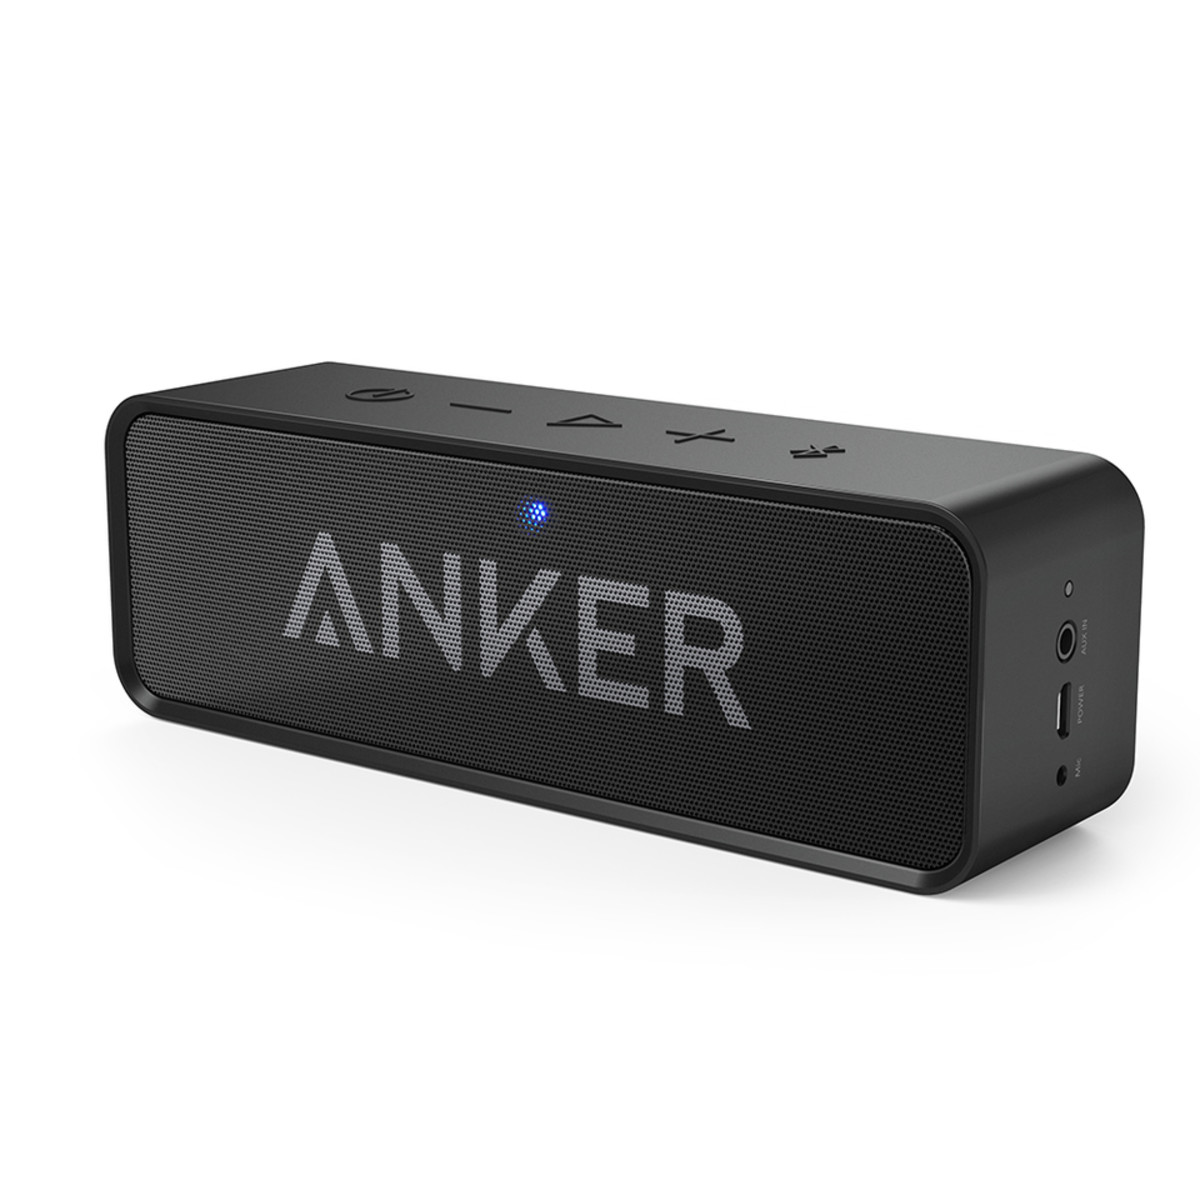 The Anker SoundCore speaker supports Bluetooth 4.0 and can last for up to five hours on a full charge.